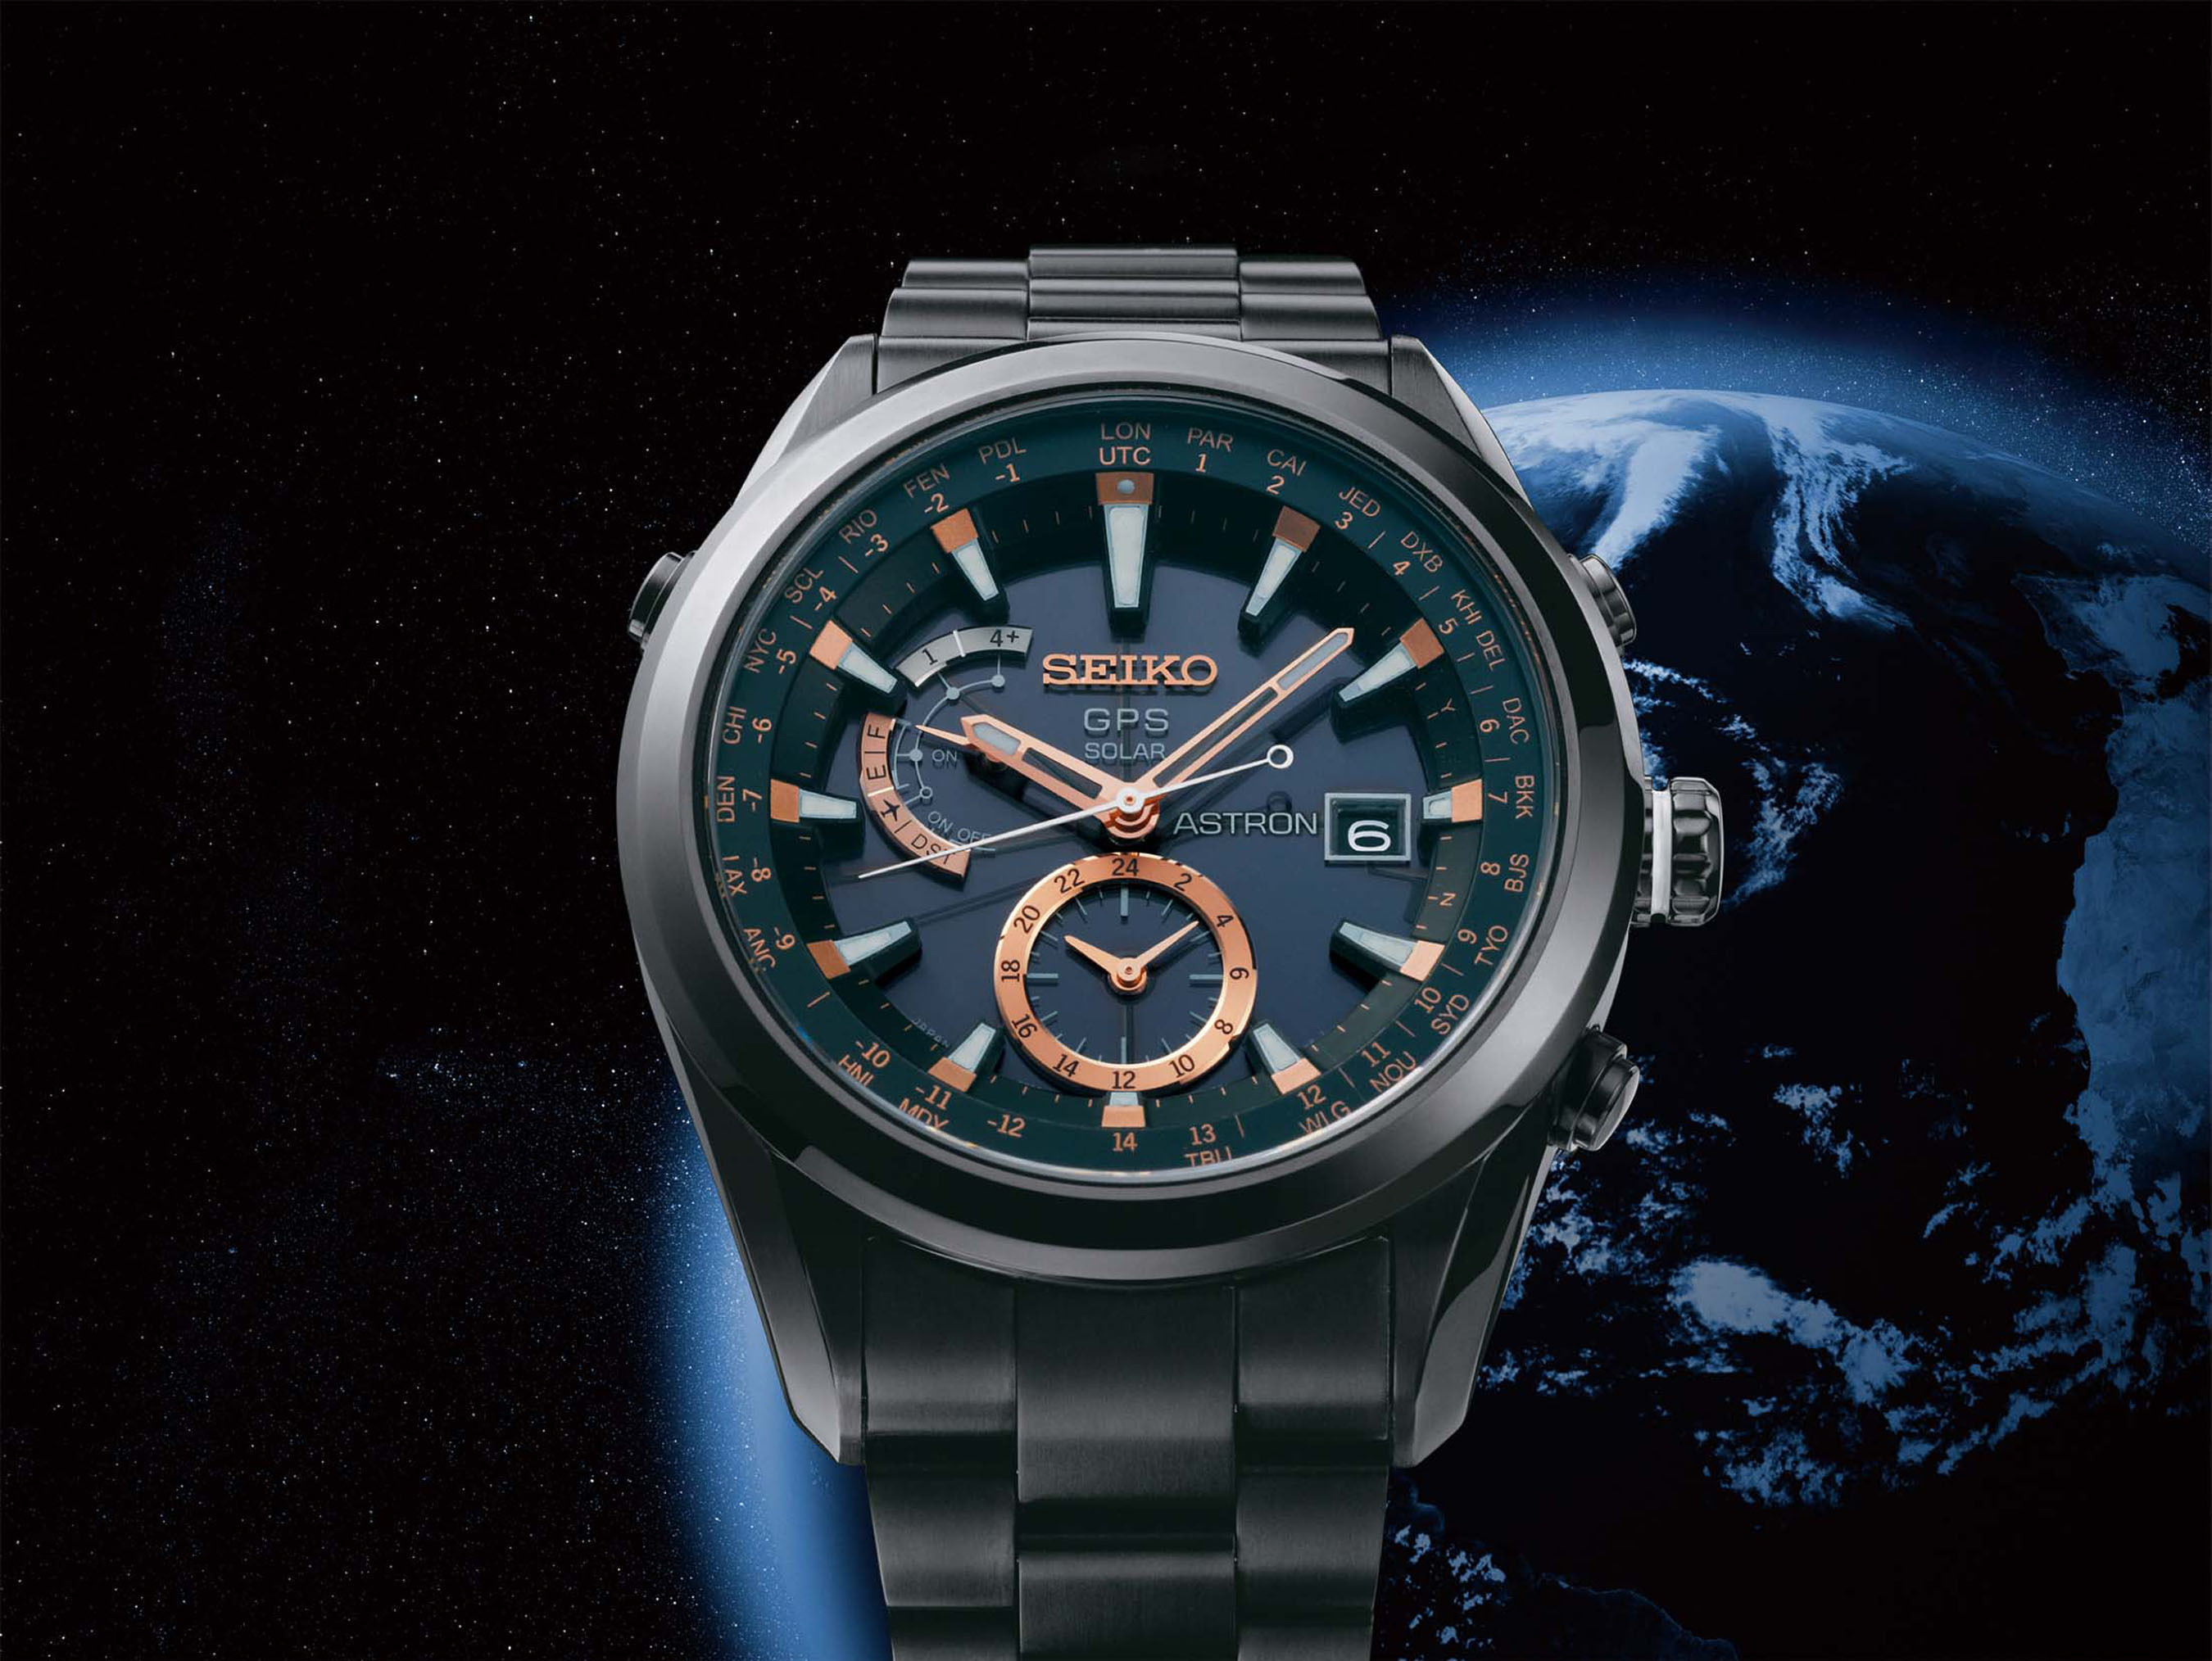 Seiko Astron: The World's First GPS Solar Watch